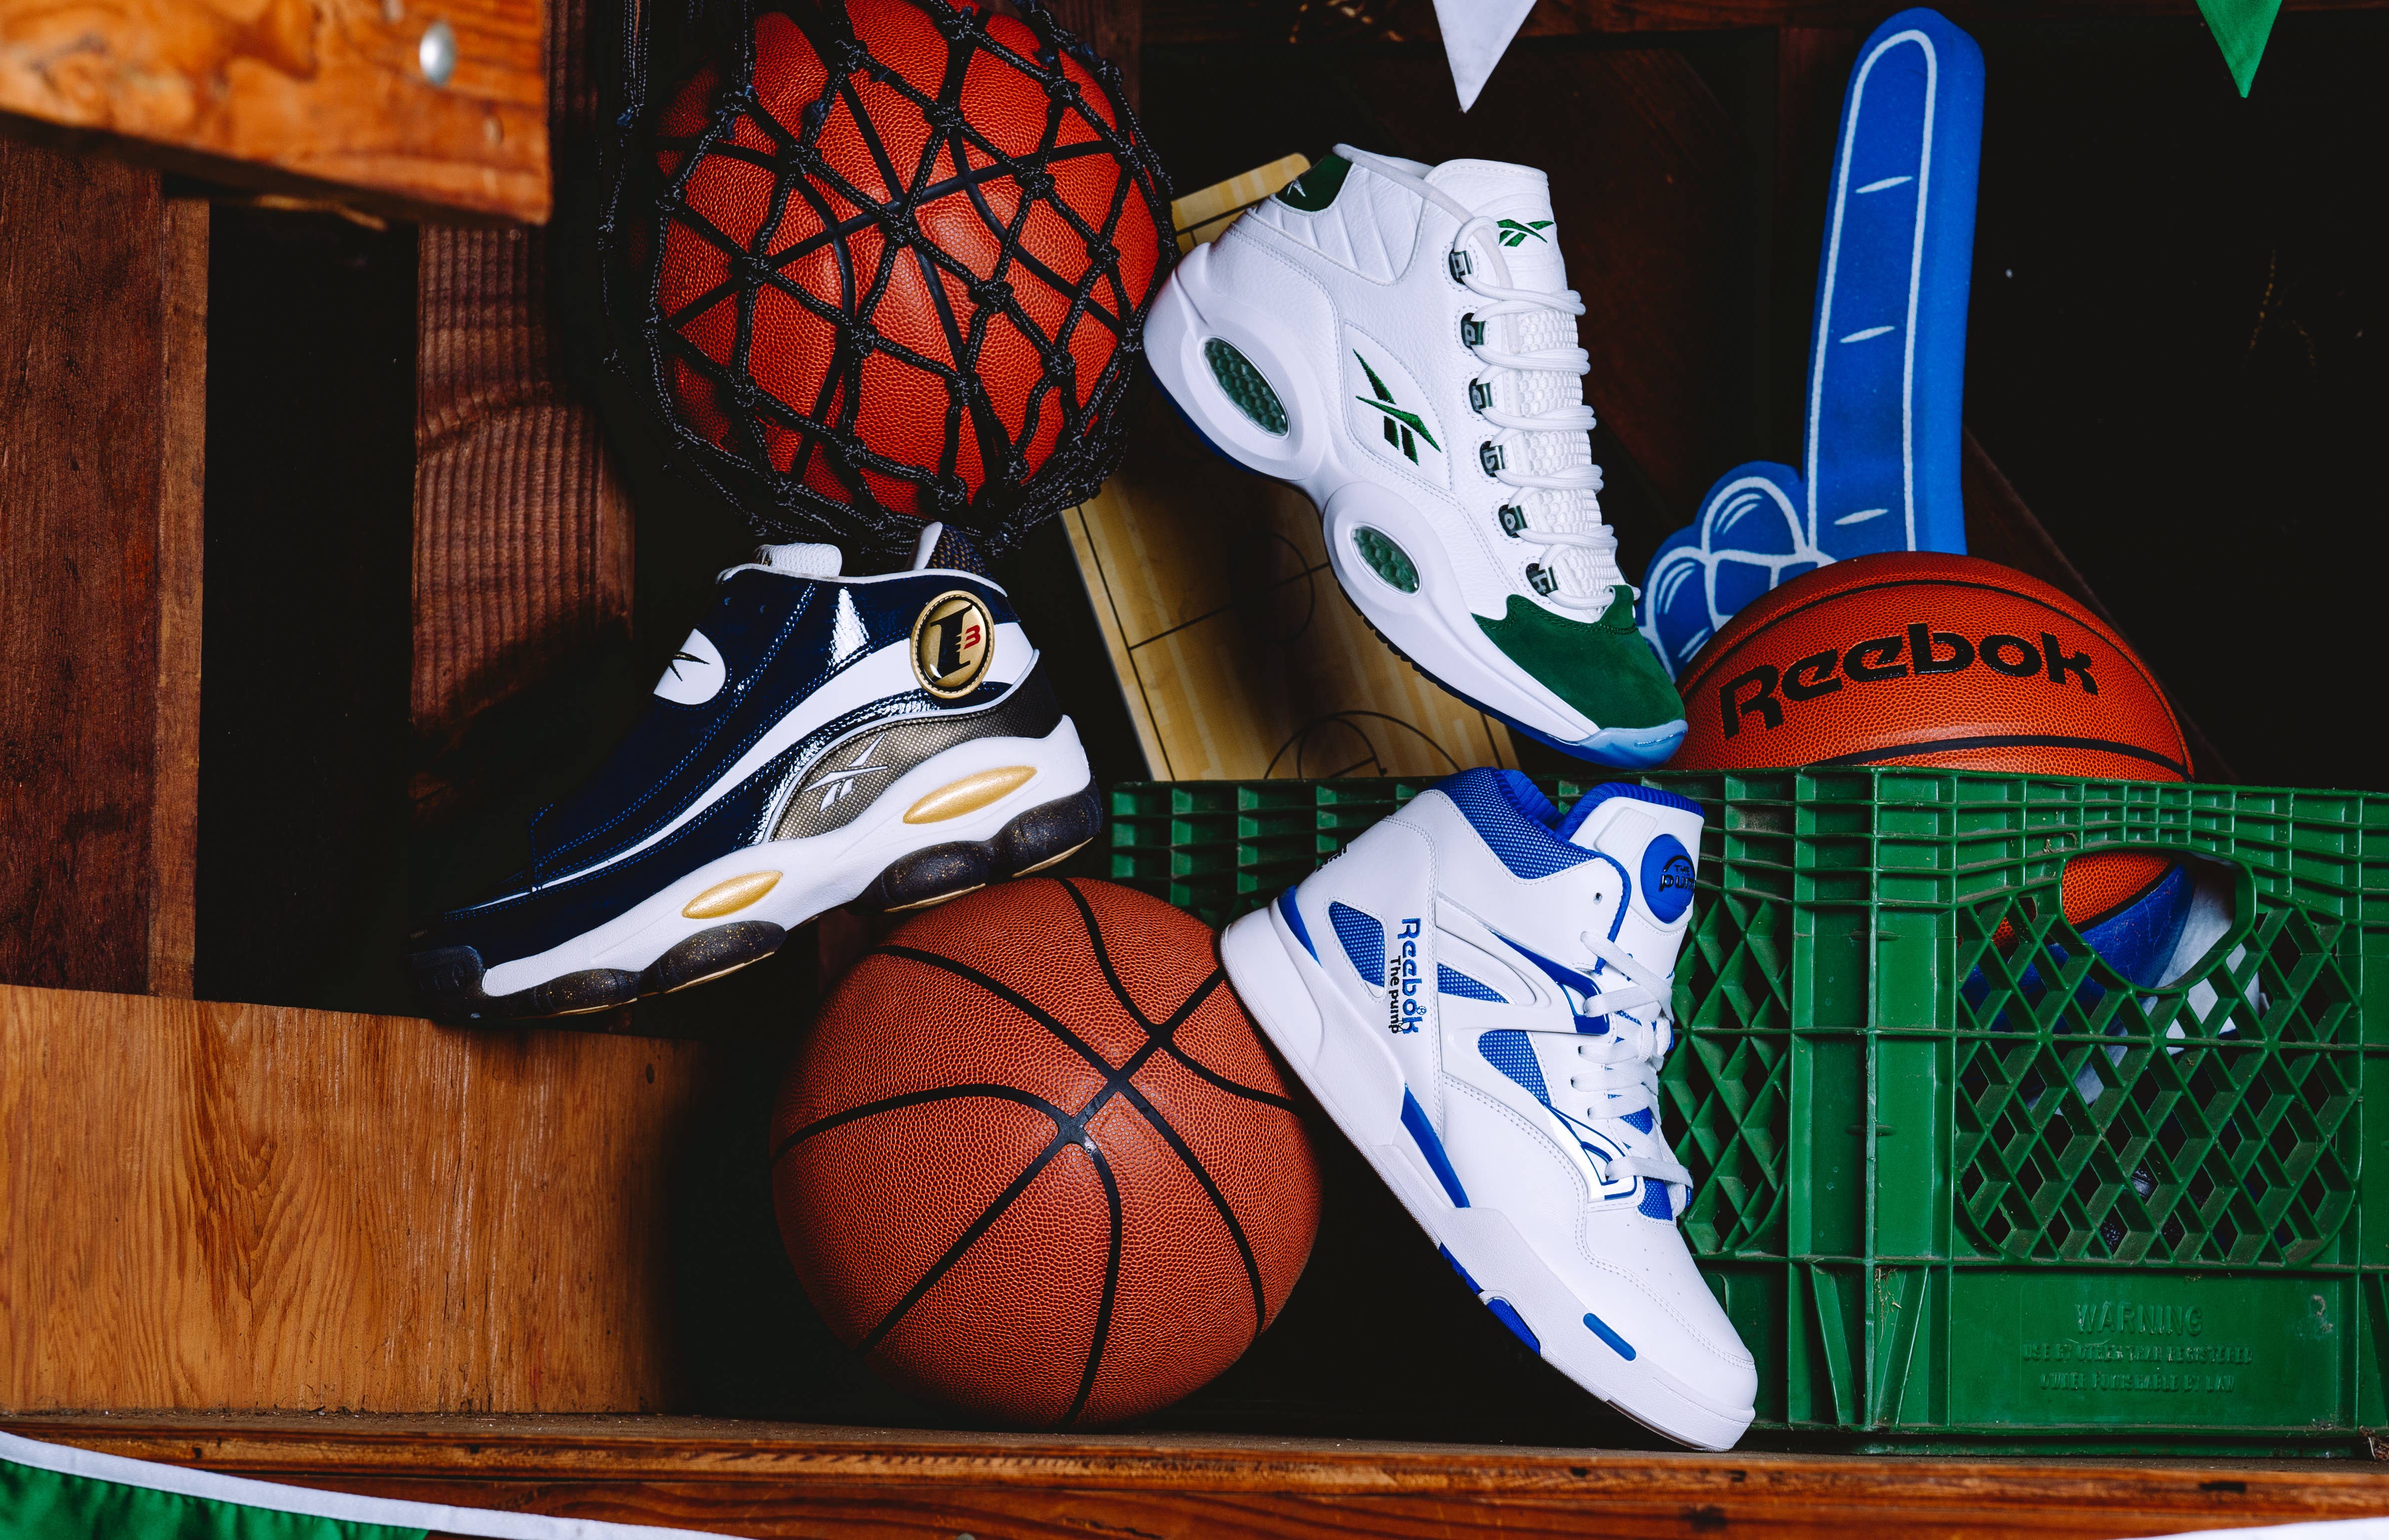 Reebok Basketball Readies a 'Collegiate Pack' for March Madness